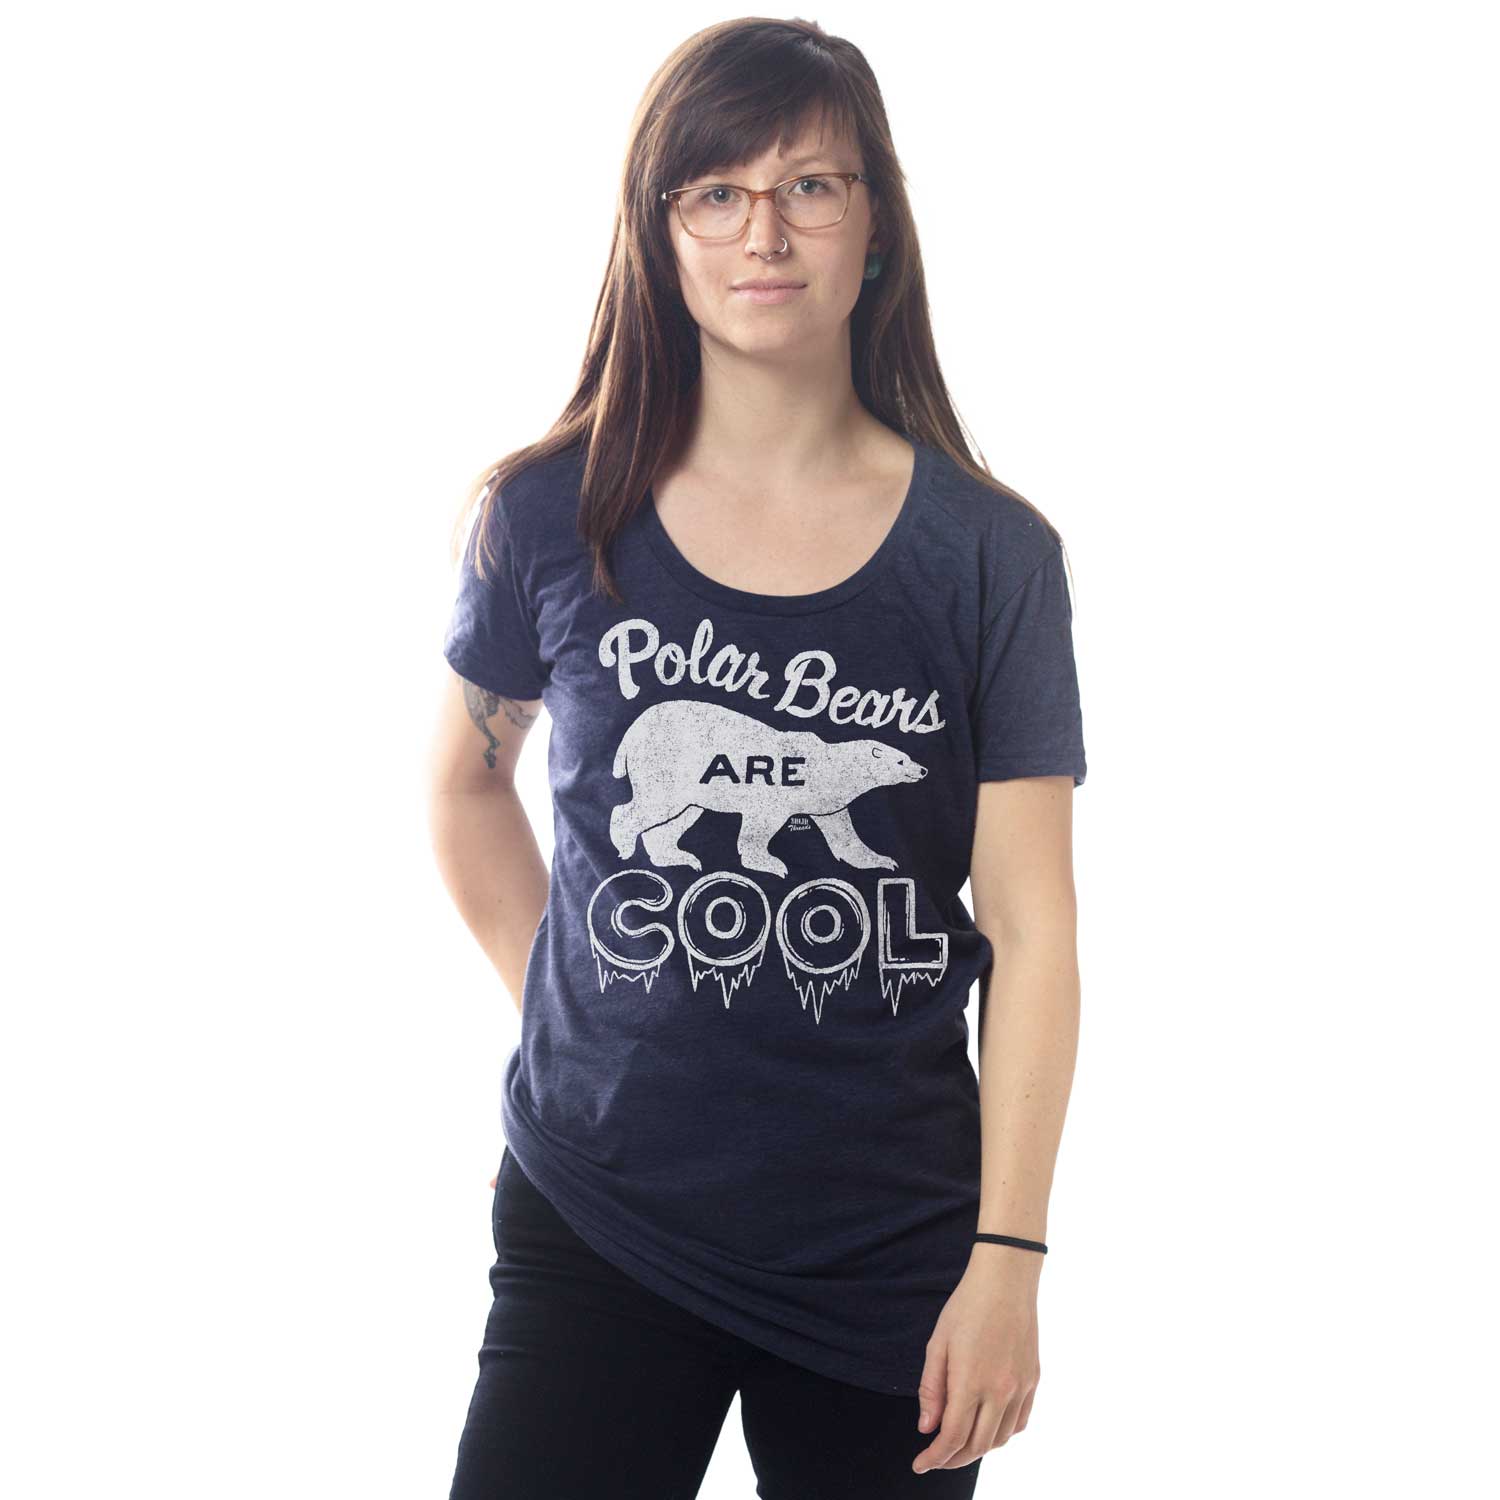 Women's Polar Bears Are Cool Vintage Graphic T-Shirt | Funny Animal Tee on Model | Solid Threads